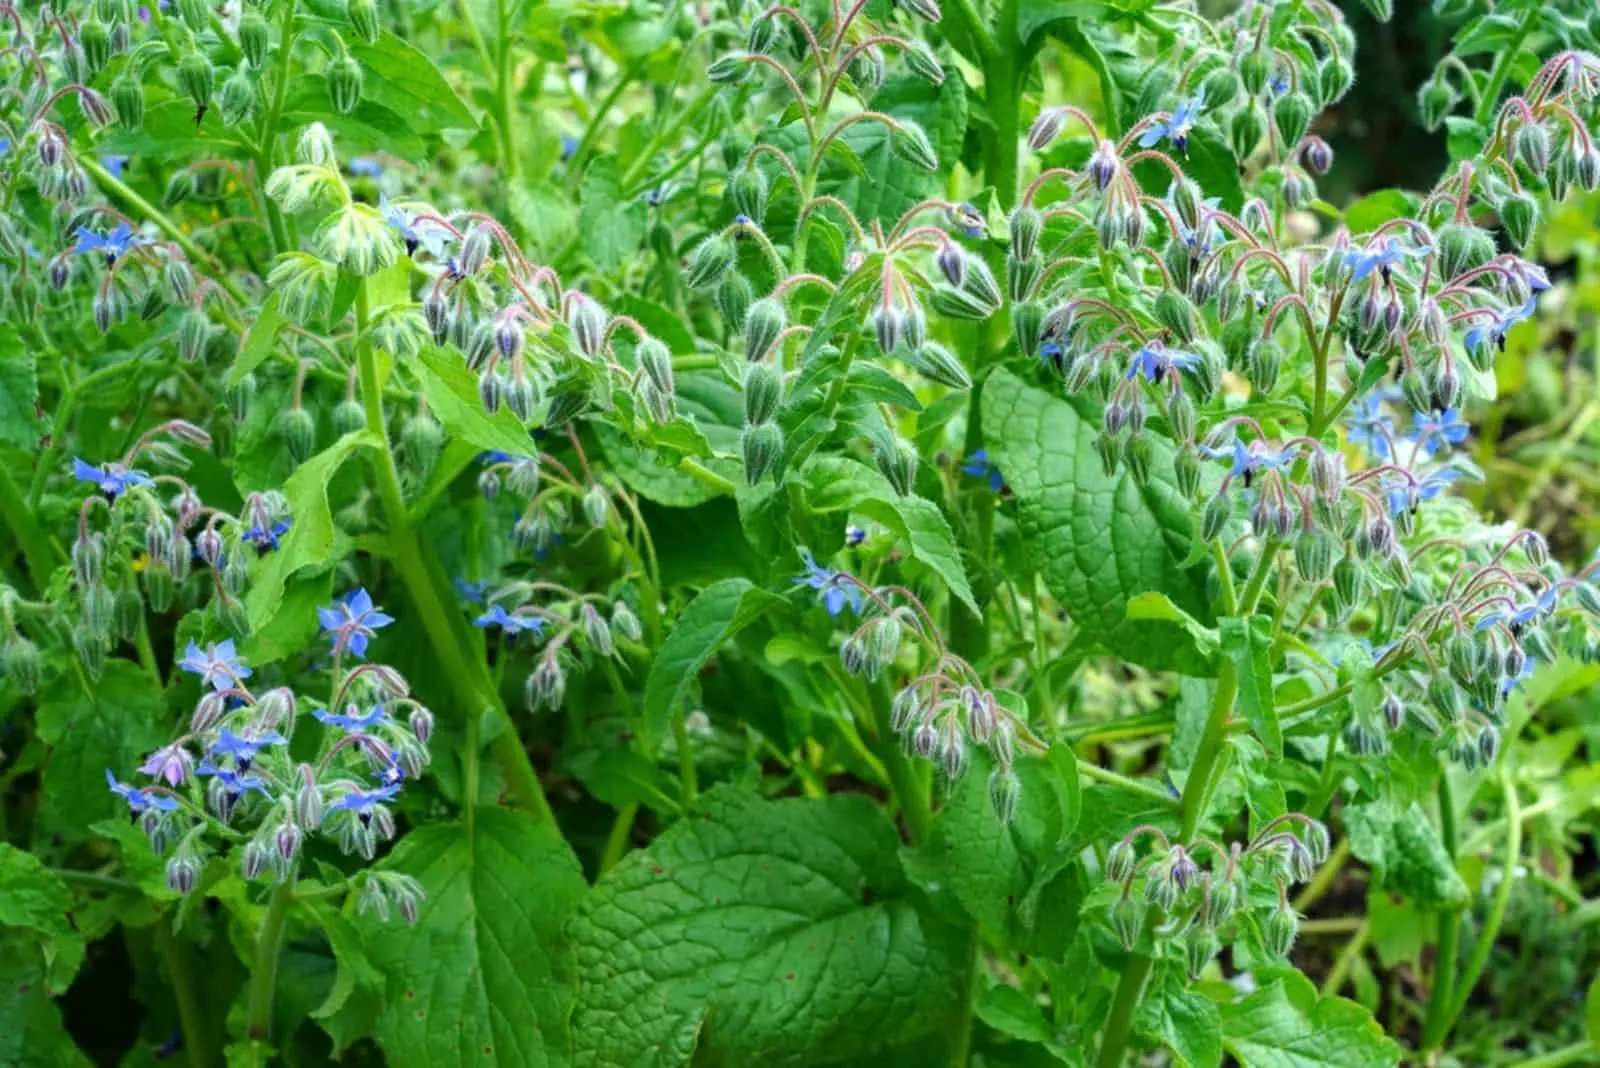 Blue star shaped flowers of the borage plant